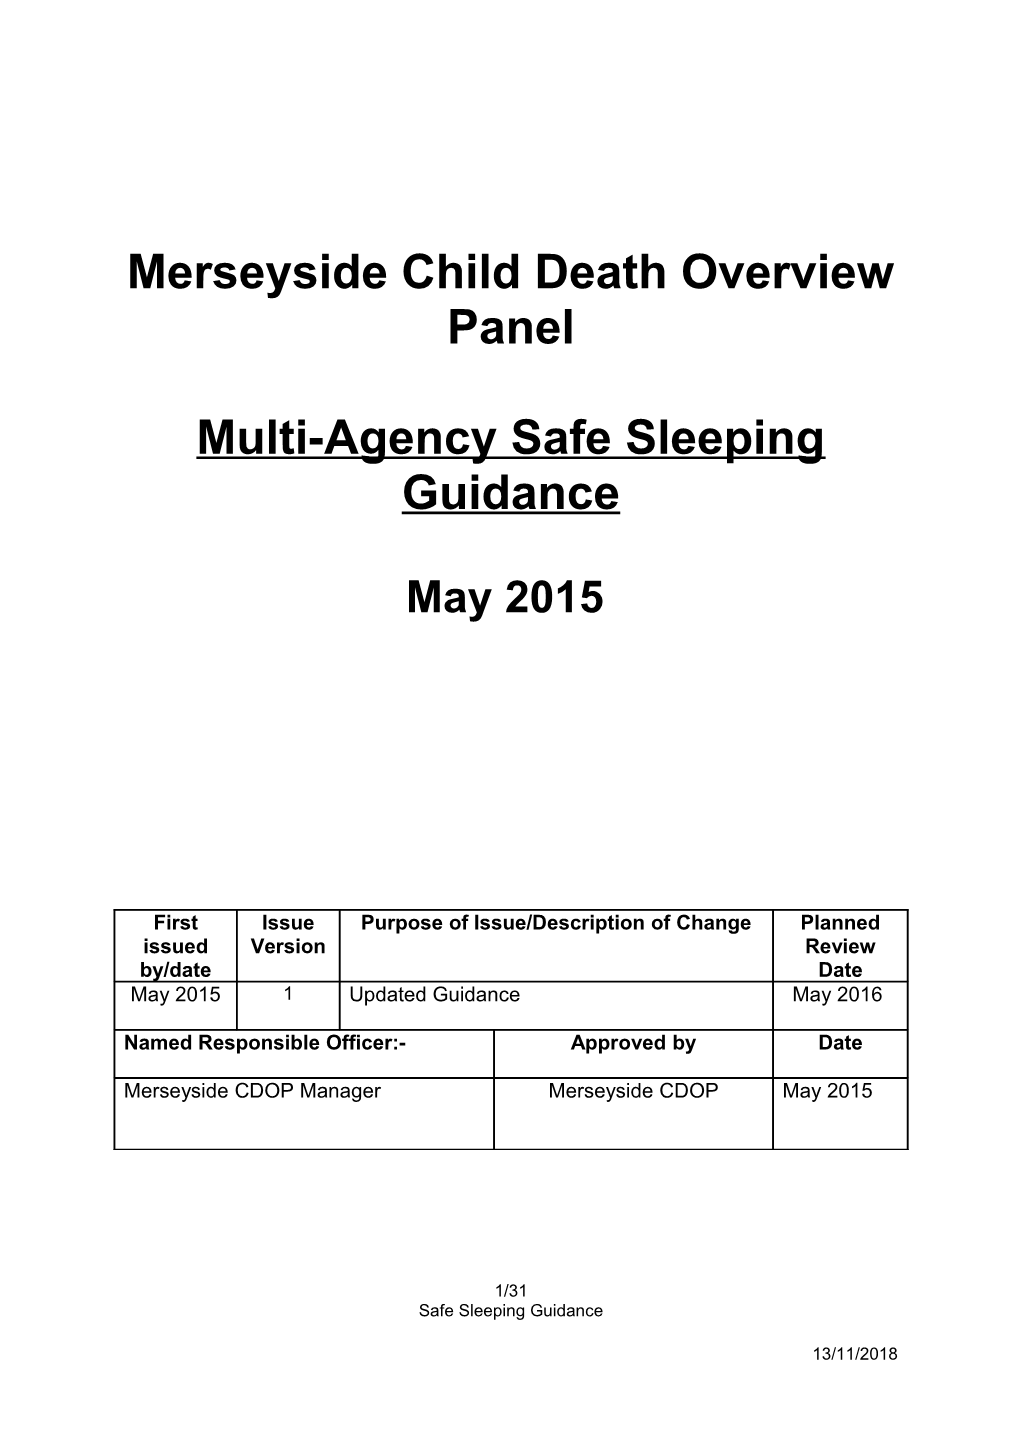 Merseyside Child Death Overview Panel